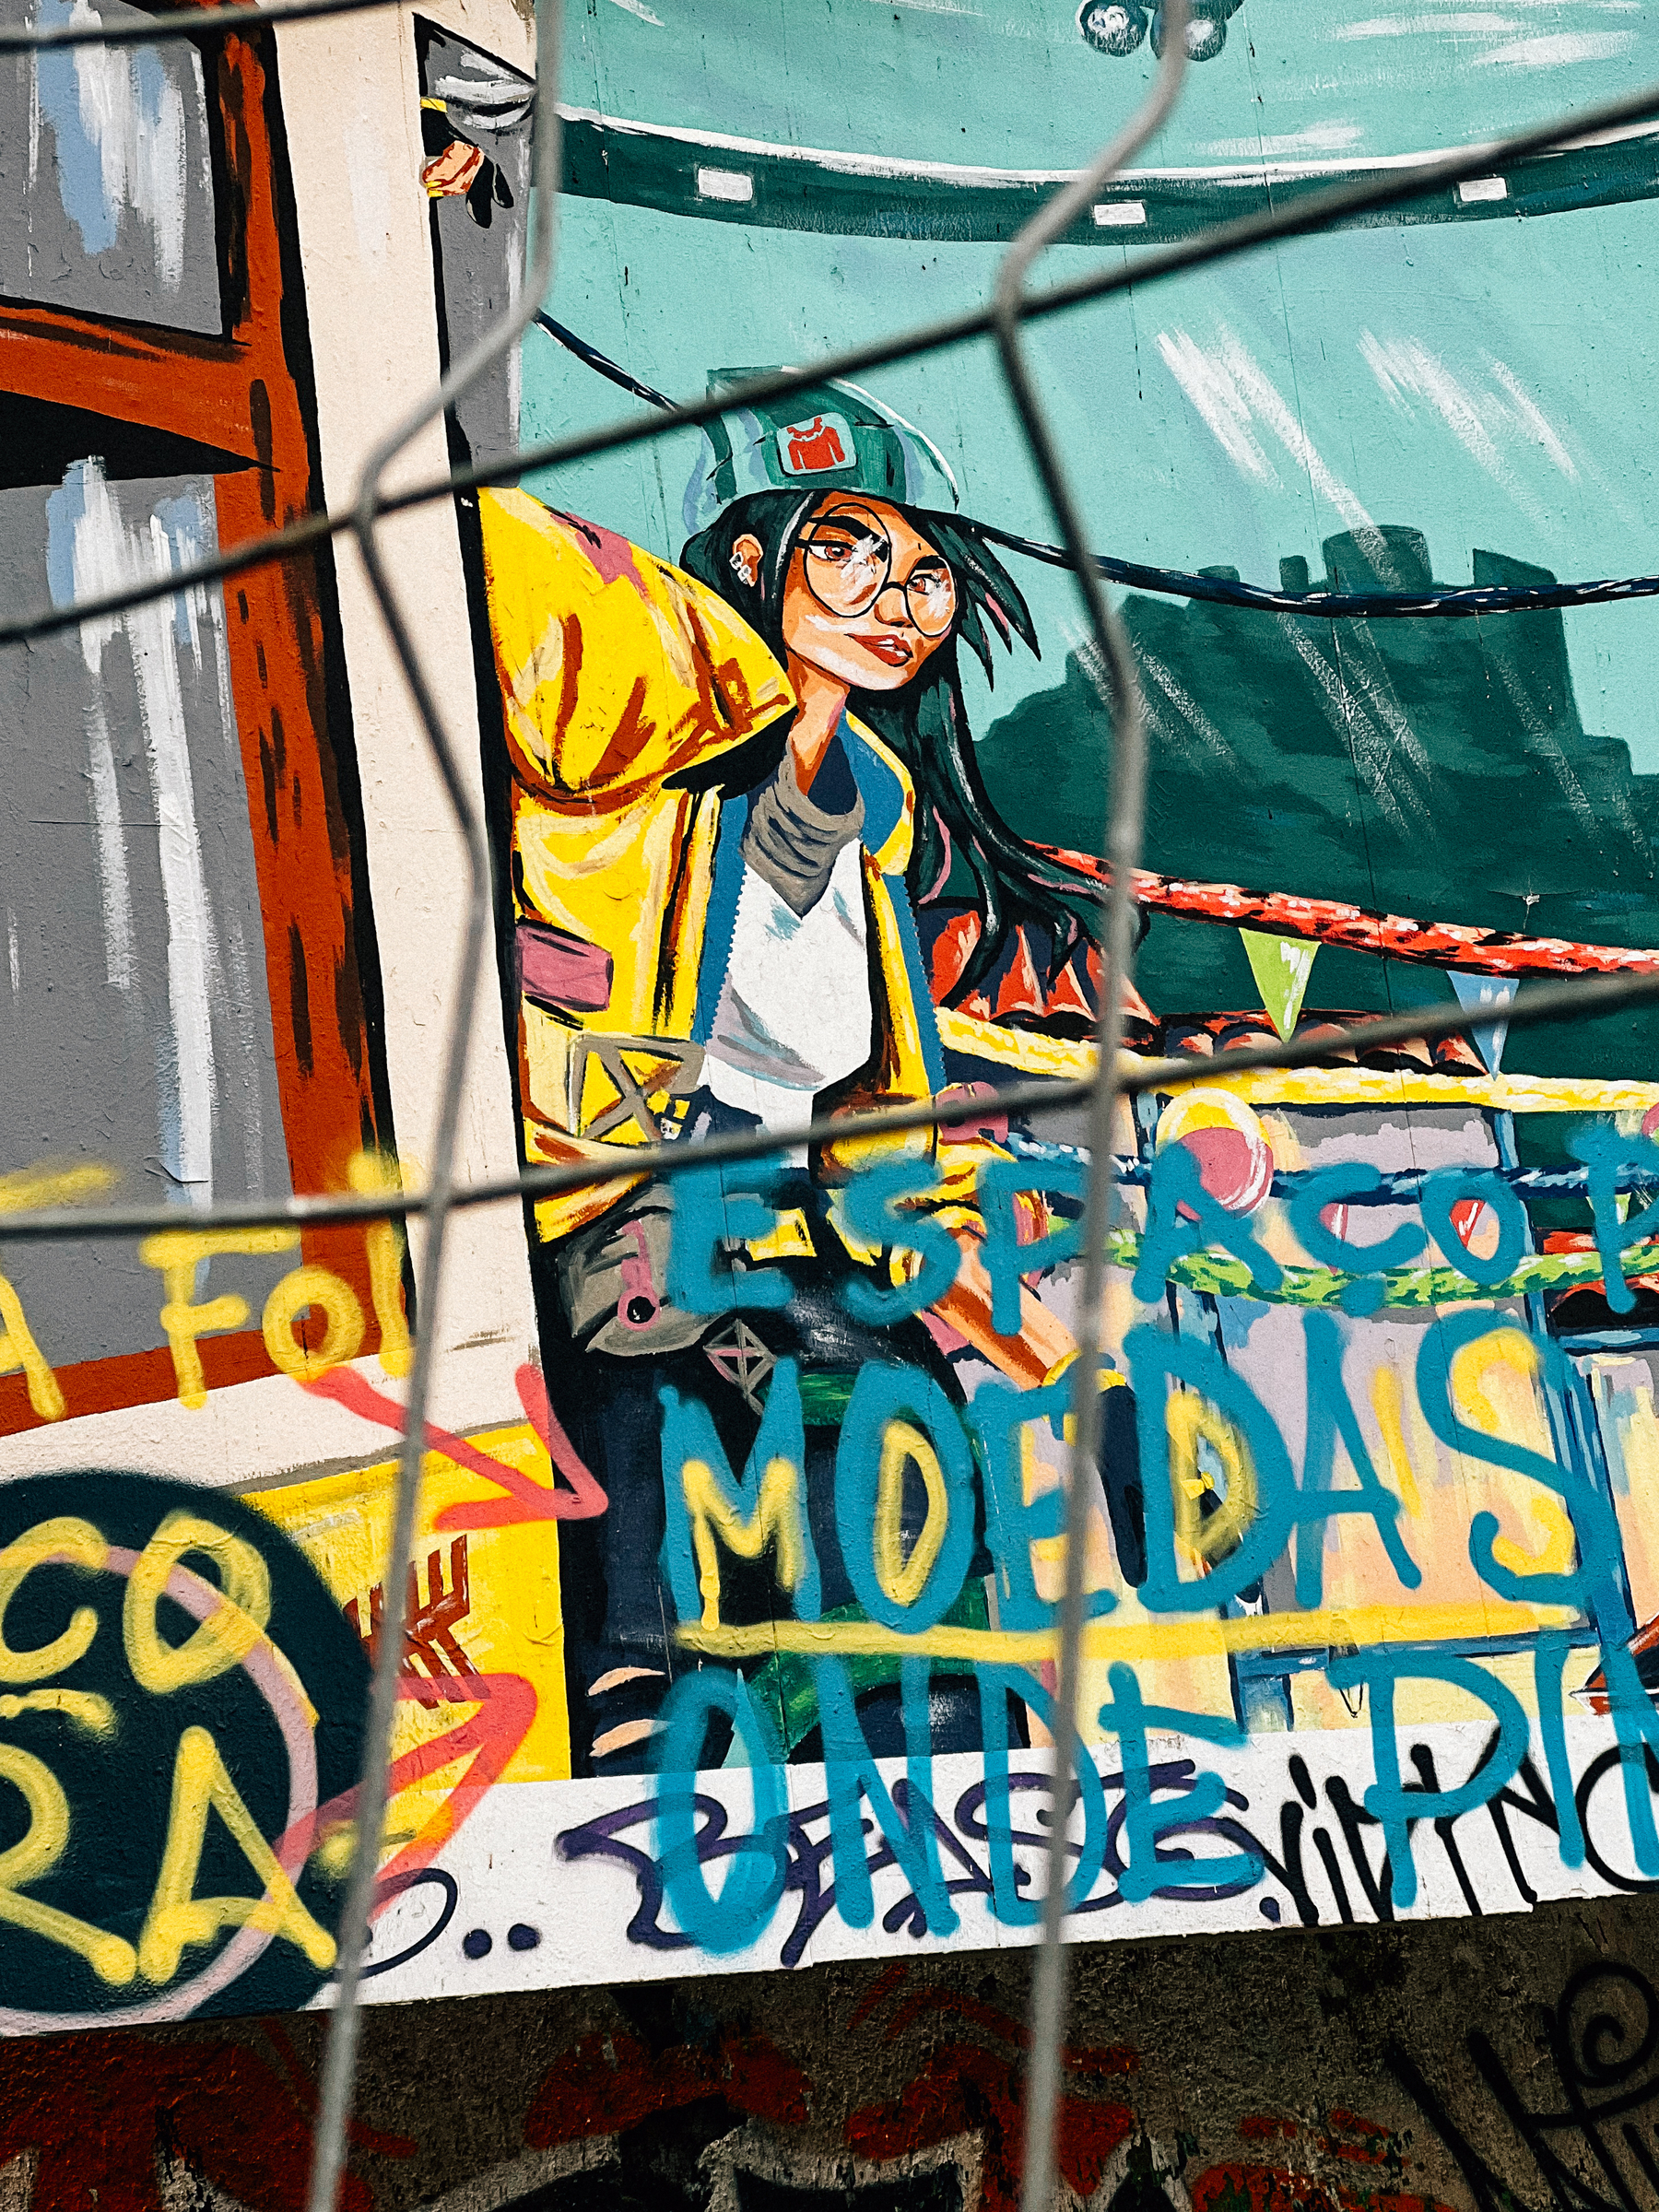 A colorful graffiti mural of a stylish woman with glasses and a hat, seen through a chain-link fence. The foreground features graffiti tags over the art.